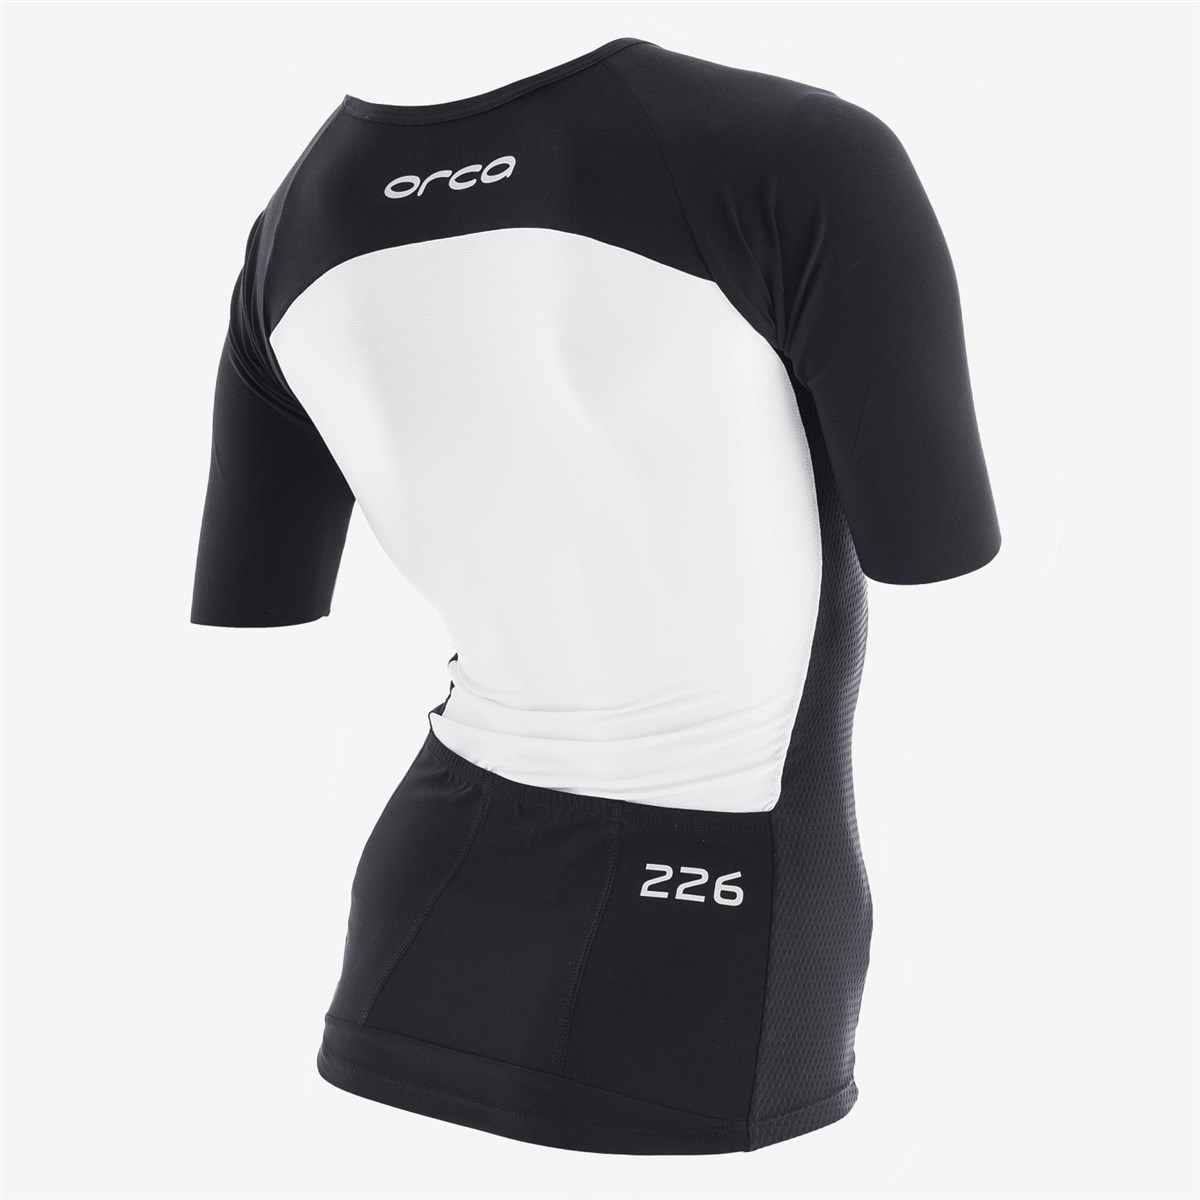 Orca Womens 226 Jersey